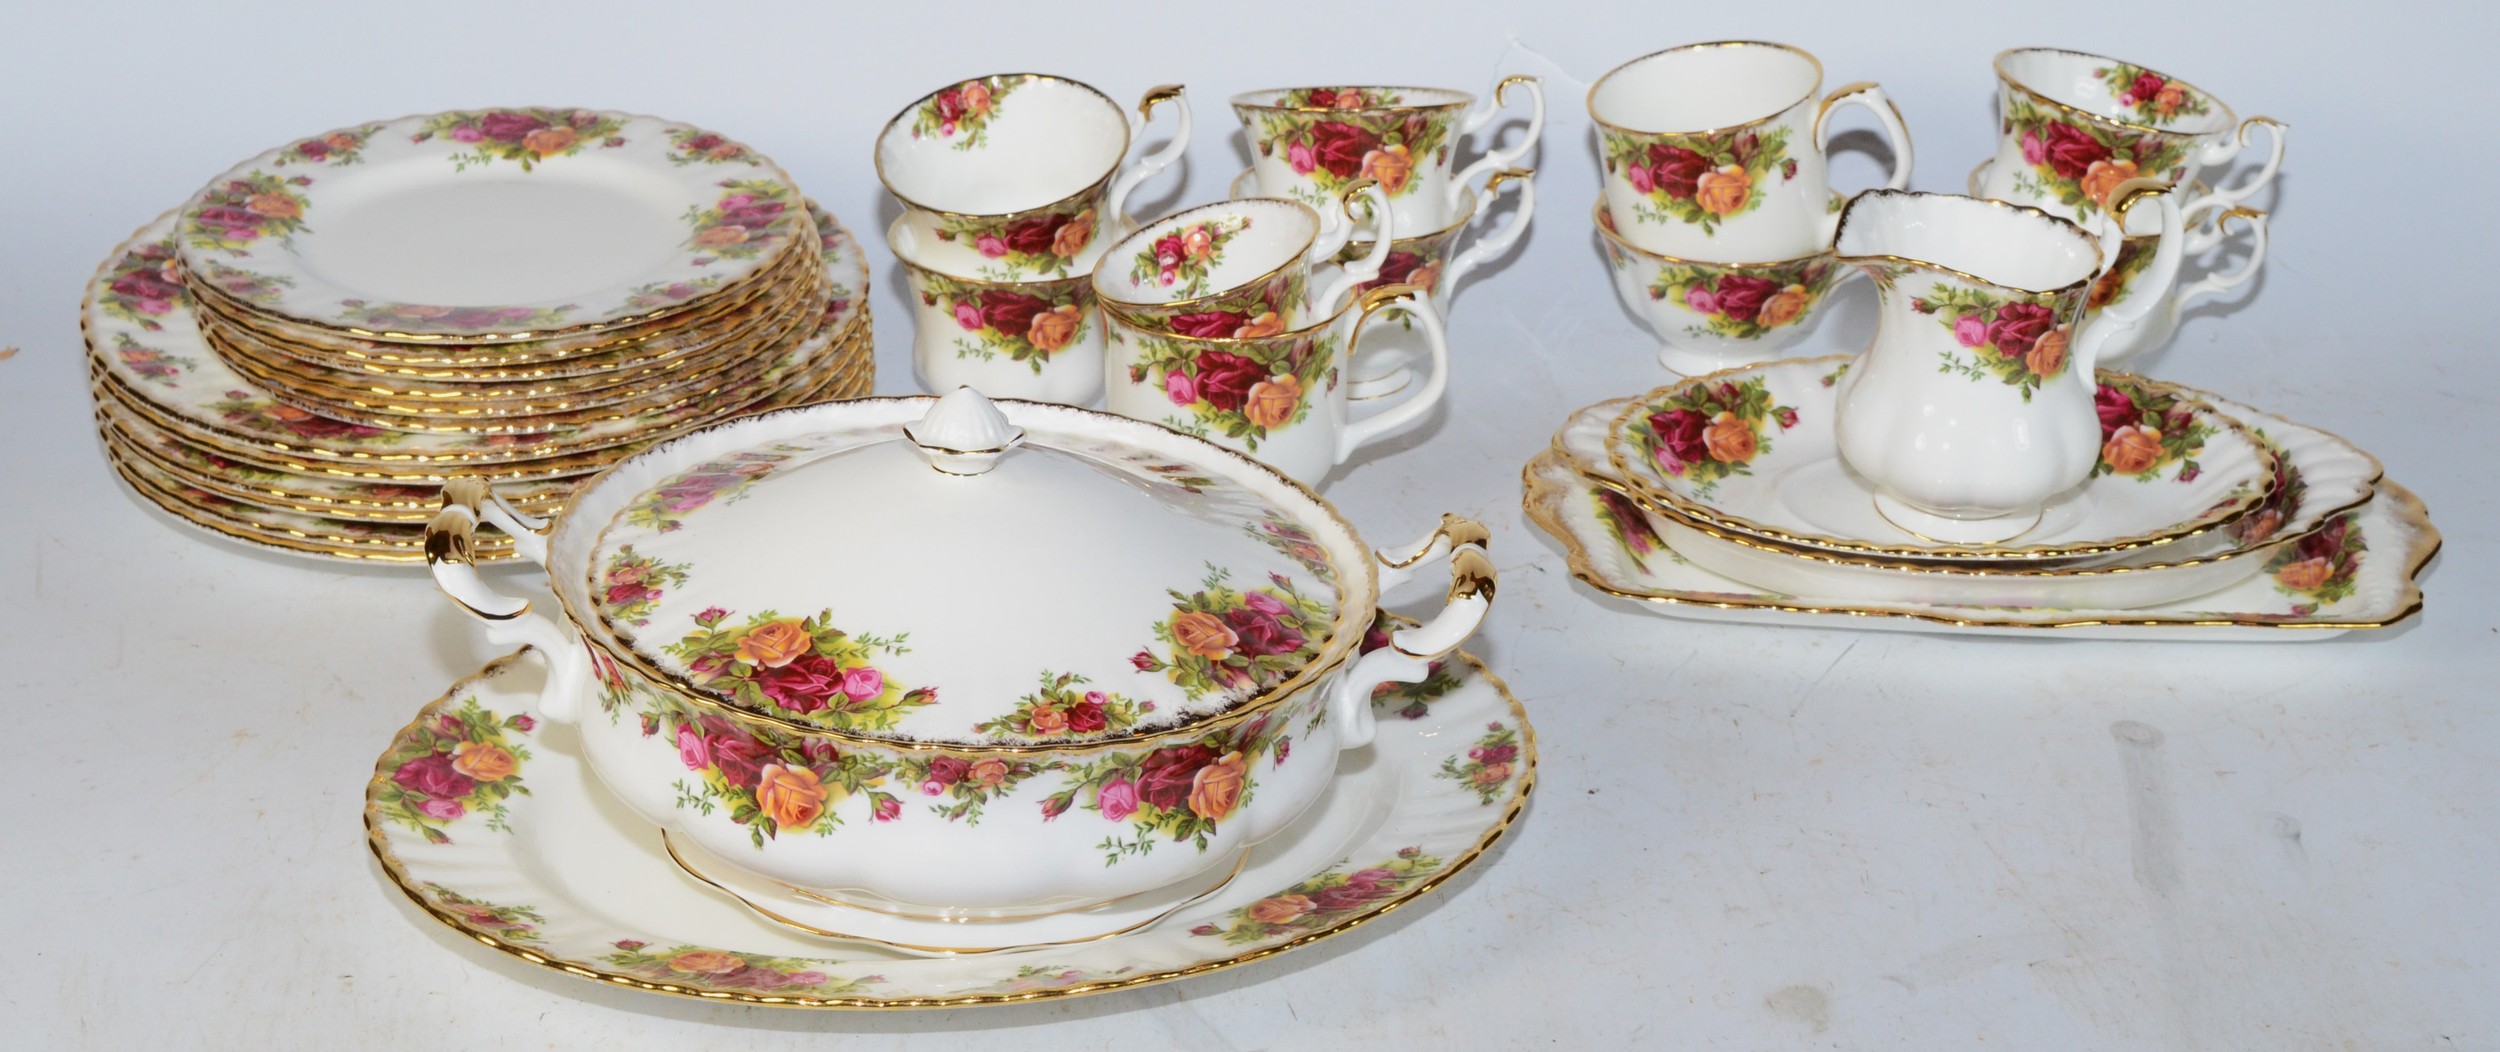 Royal Albert 'Country Roses' Sixty four piece dinner/tea service, together with associated